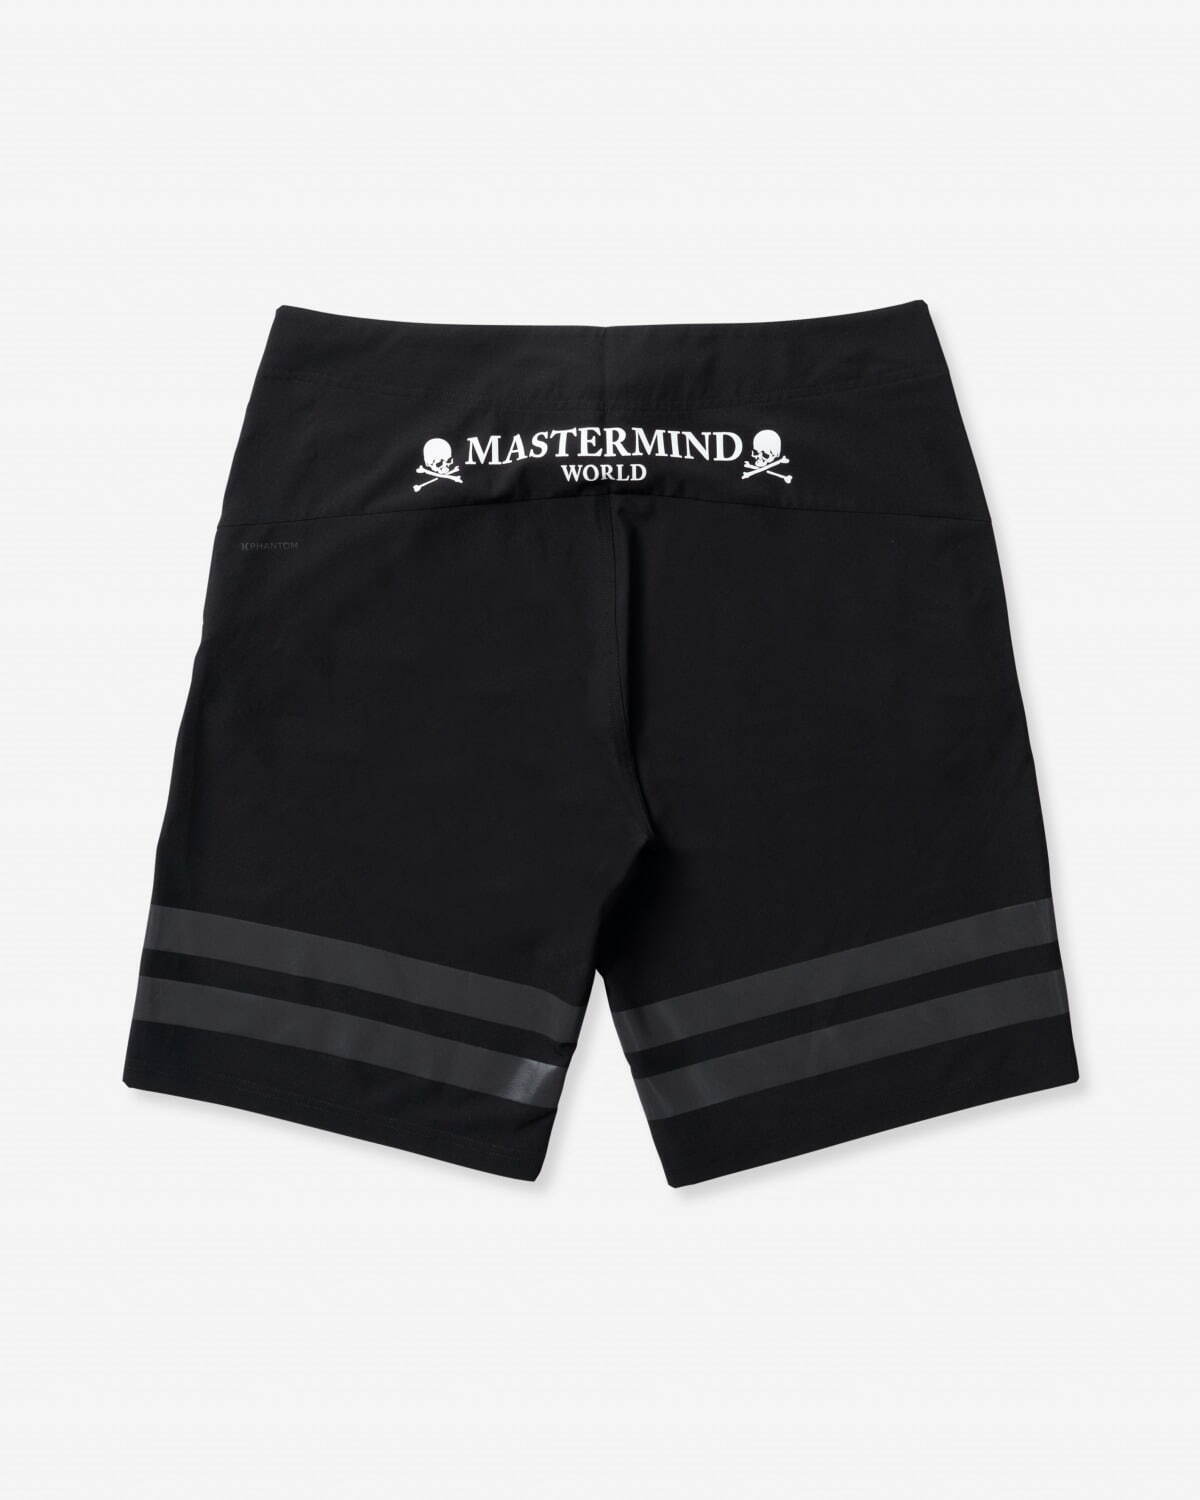 2022 Hurley x Mastermind World Collection